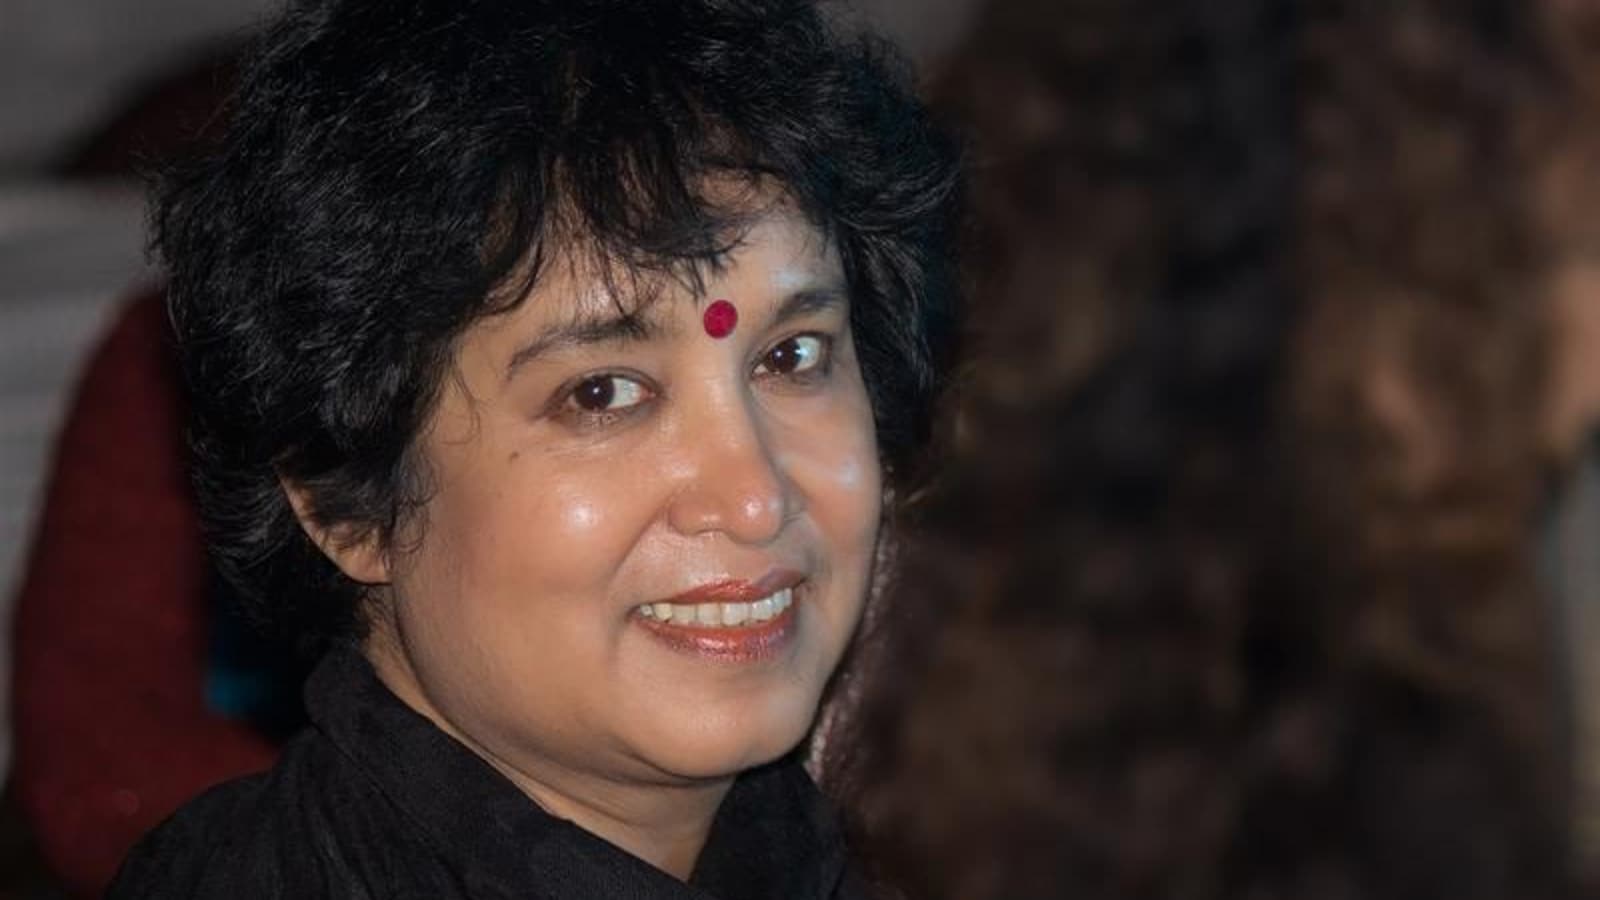 '...Prophet Muhammad would be shocked to see madness of Muslim...': Author Taslima Nasreen